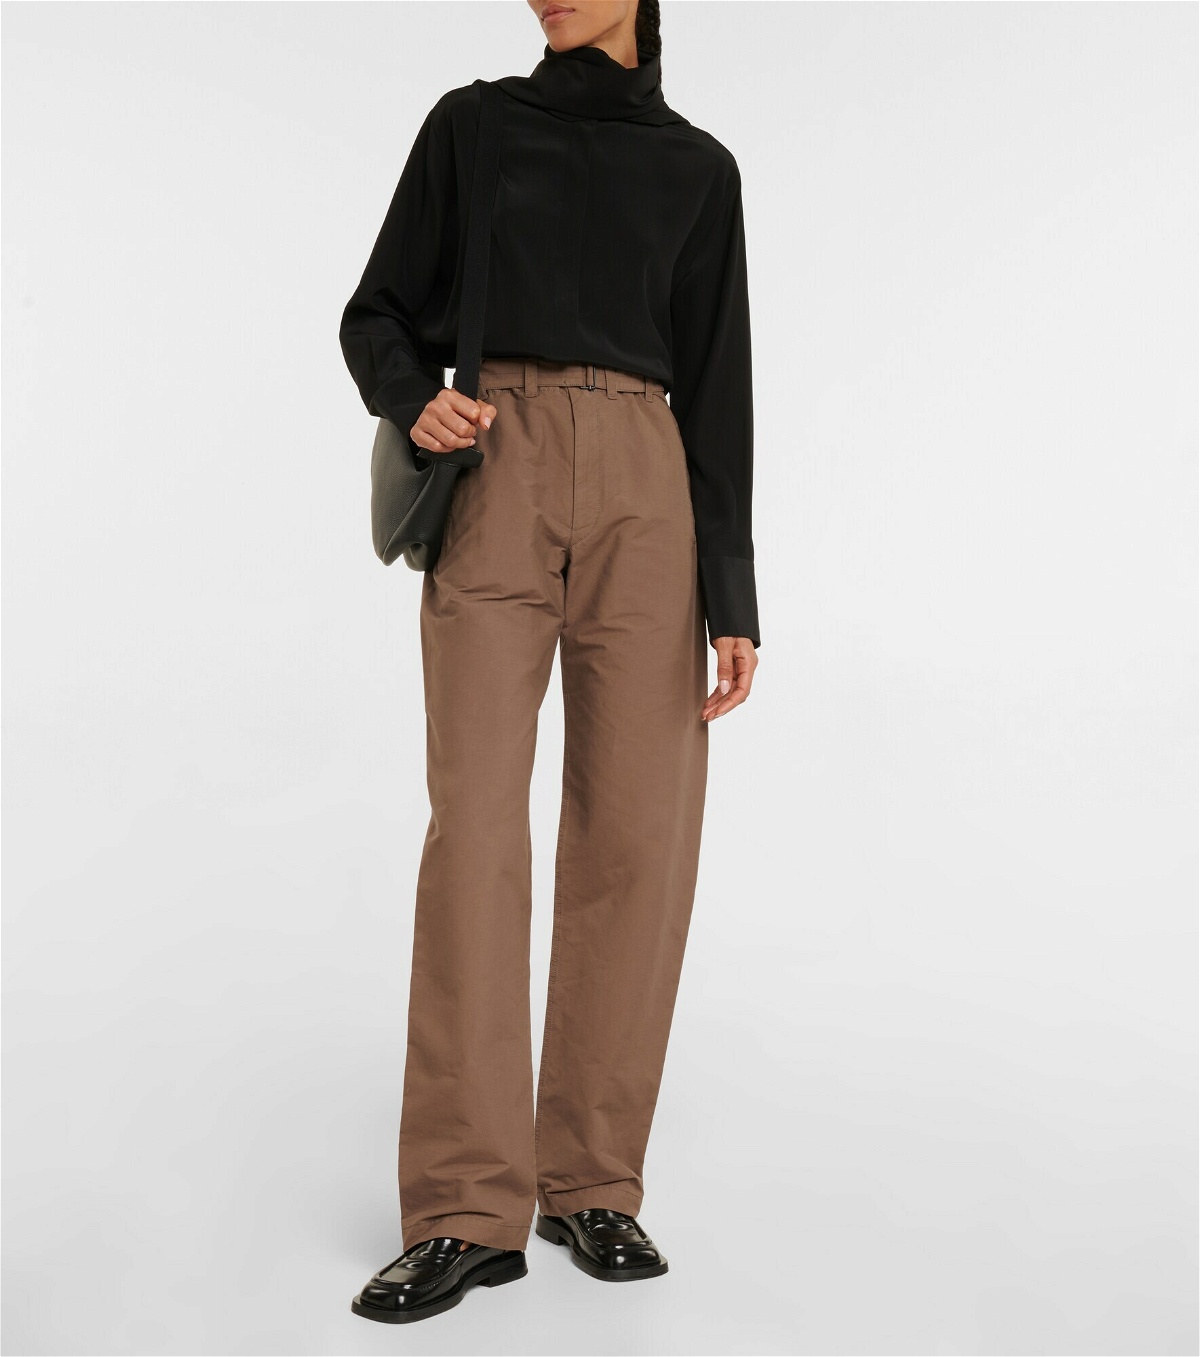 Lemaire - High-rise belted pants Lemaire